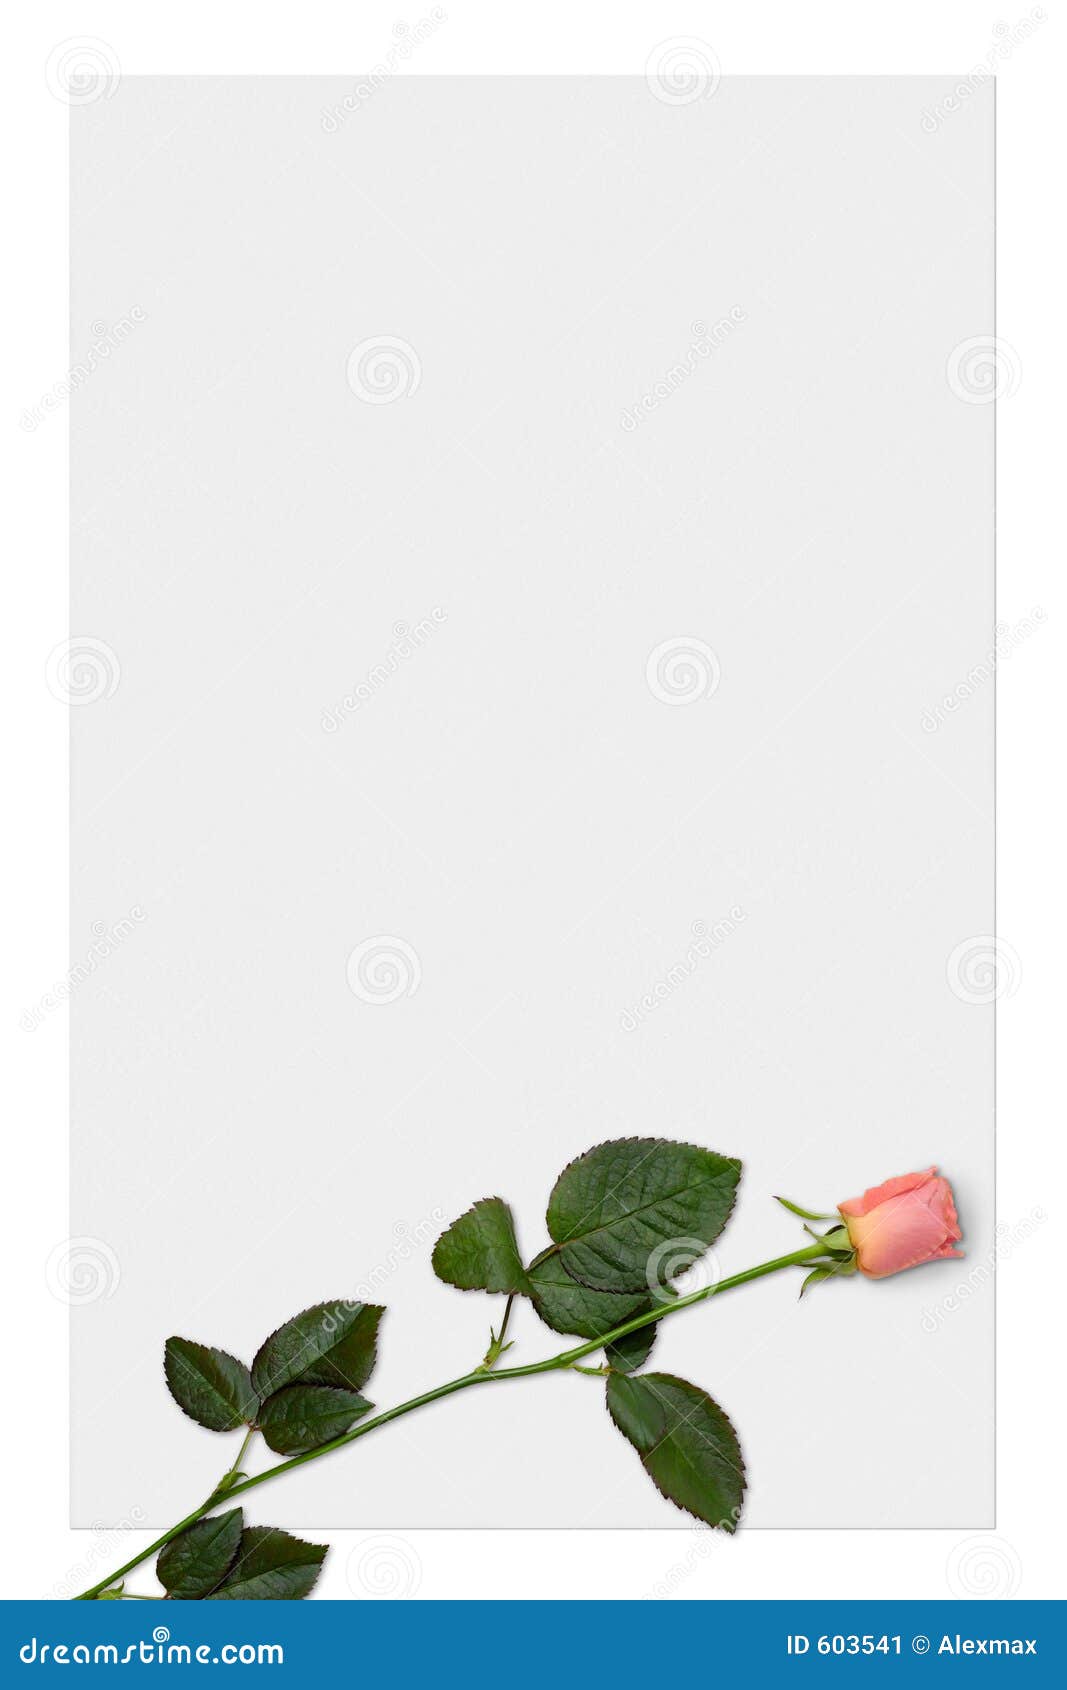 Love Letter Paper with Red Rose Background Stock Illustration